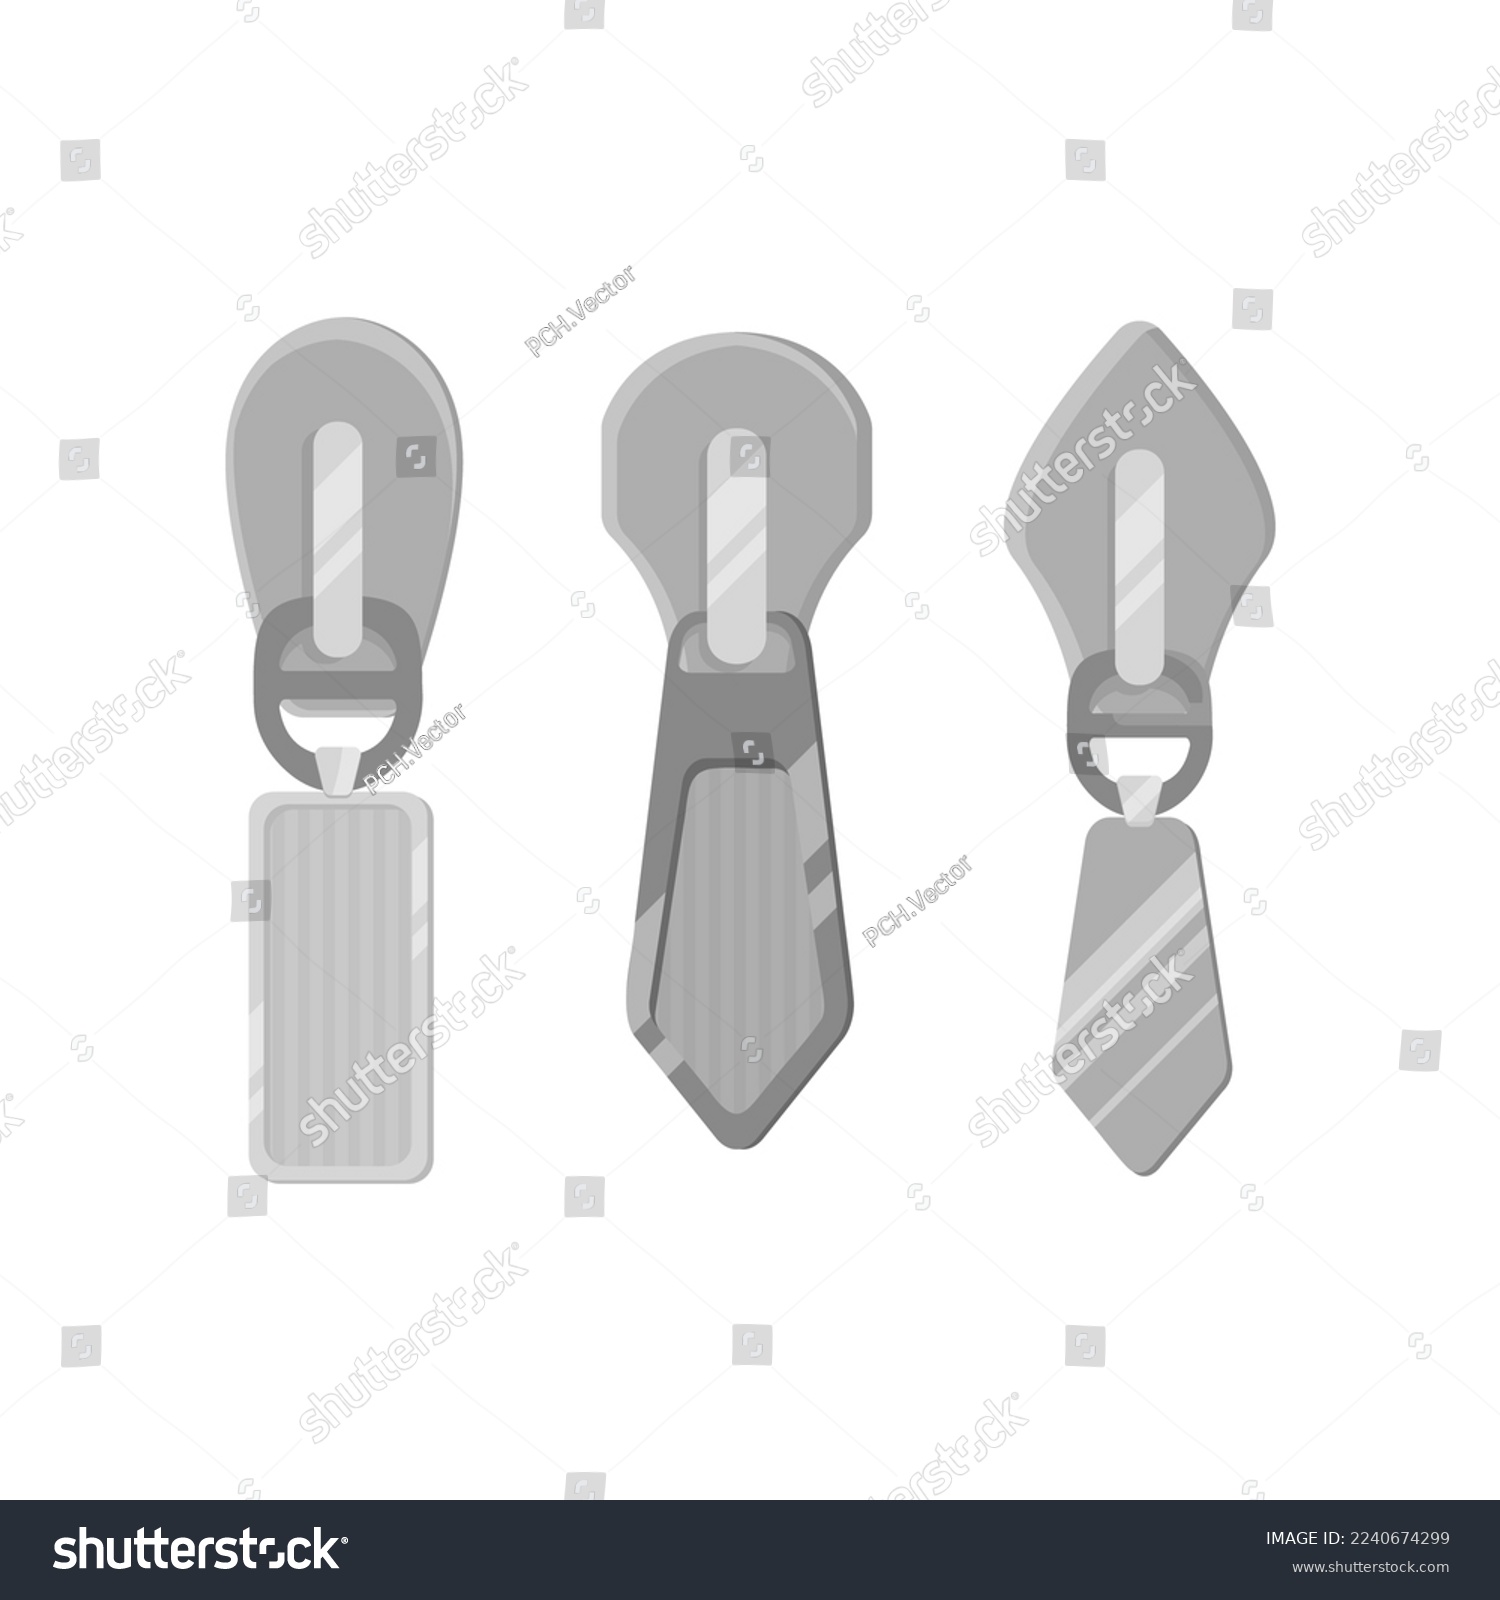 SVG of Modern zip sliders for clothes cartoon illustration. Silver zipper pullers with tassels for sportswear or leather backpacks. Fashion, metal accessories concept svg